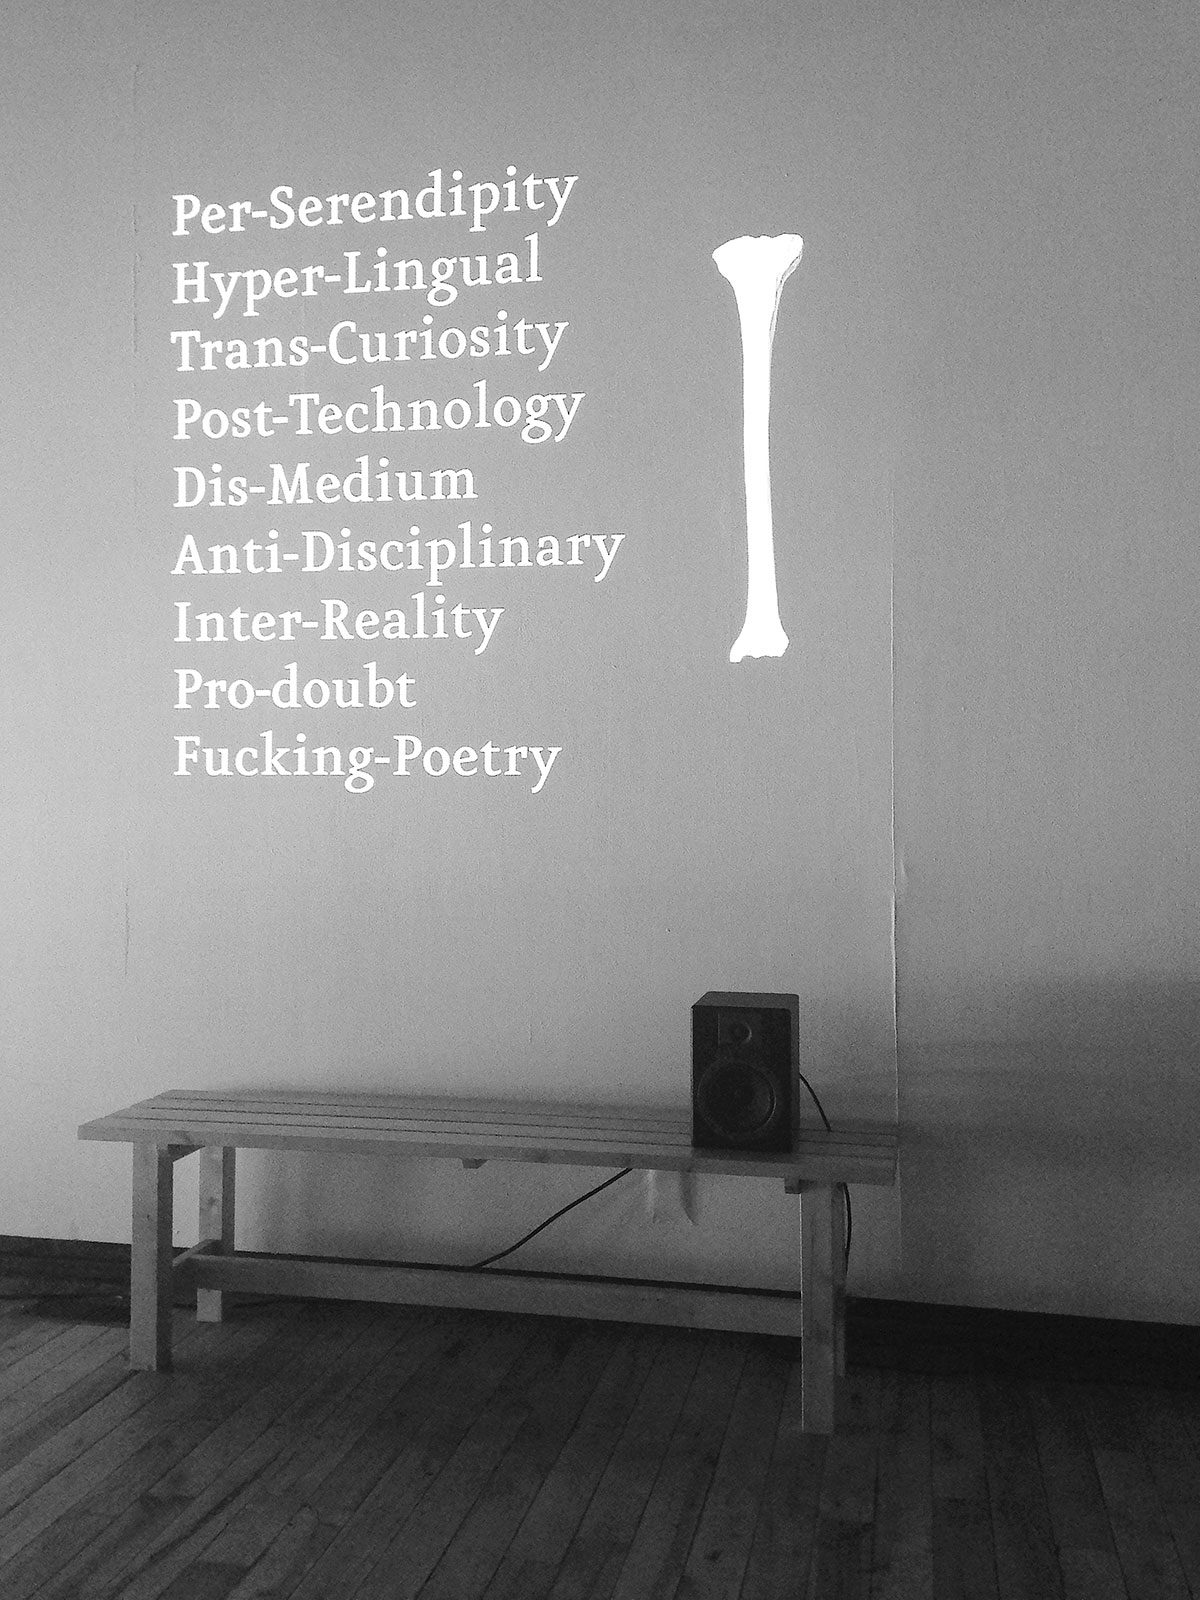 At last year’s A-B-Z-TXT typographic school in Toronto, Dimitri Nieuwenhuizen, co-founder of design studios LUST and LUSTlab in The Hague, proposed an idiosyncratic list of mental tools for creativity